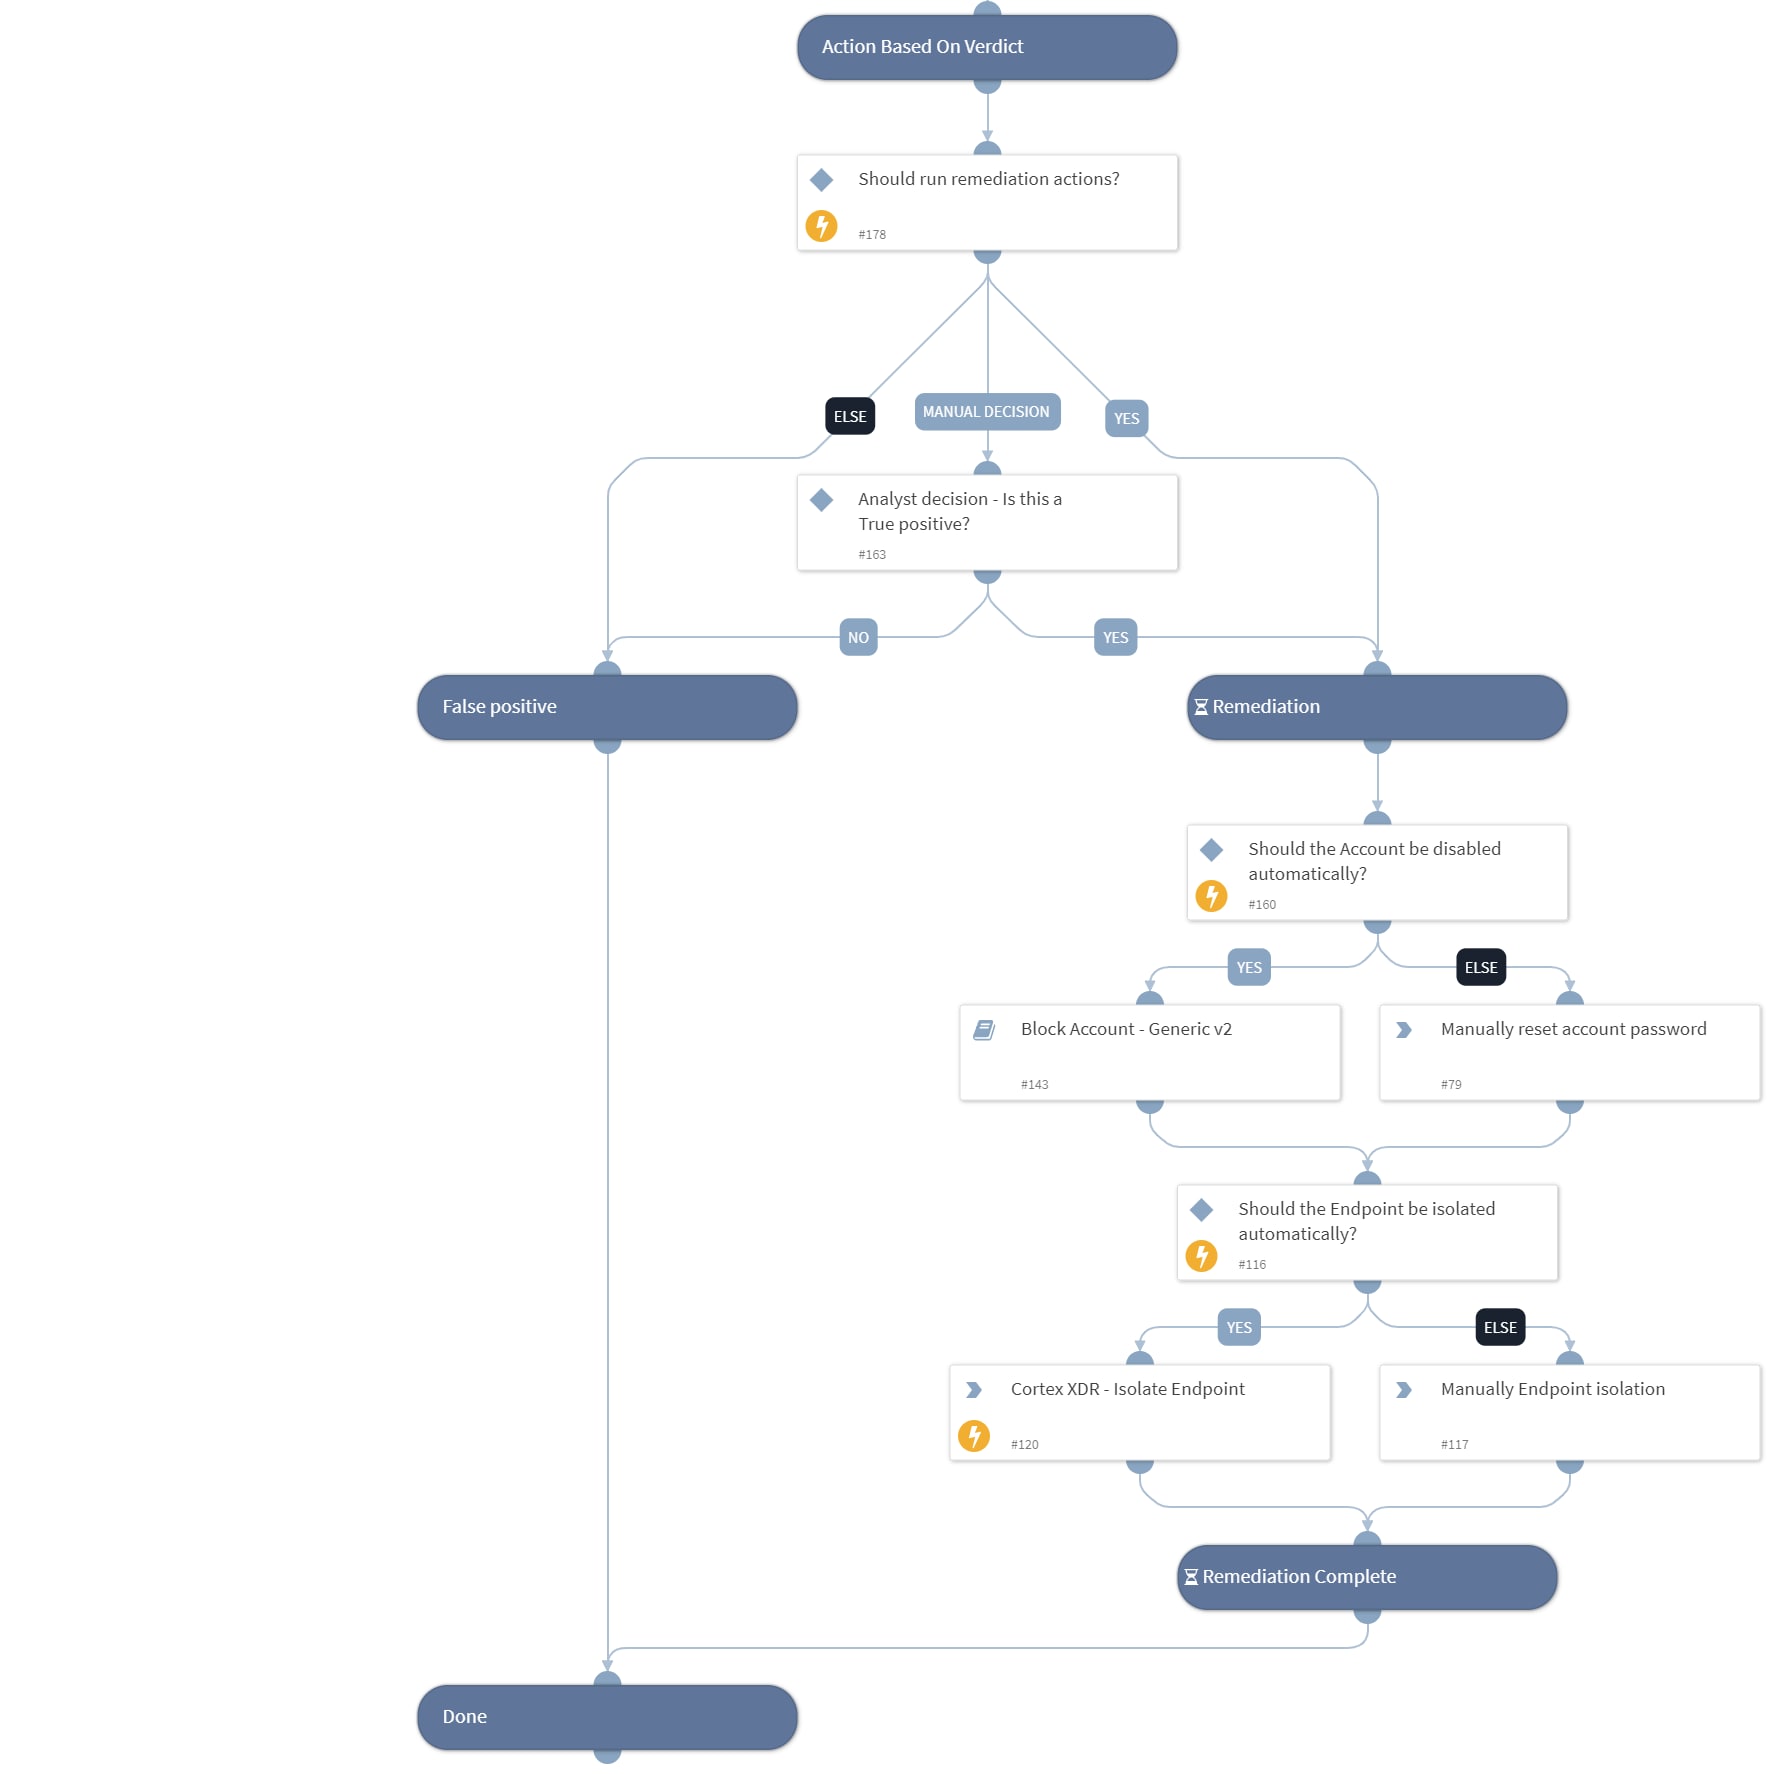 Response section of the workflow